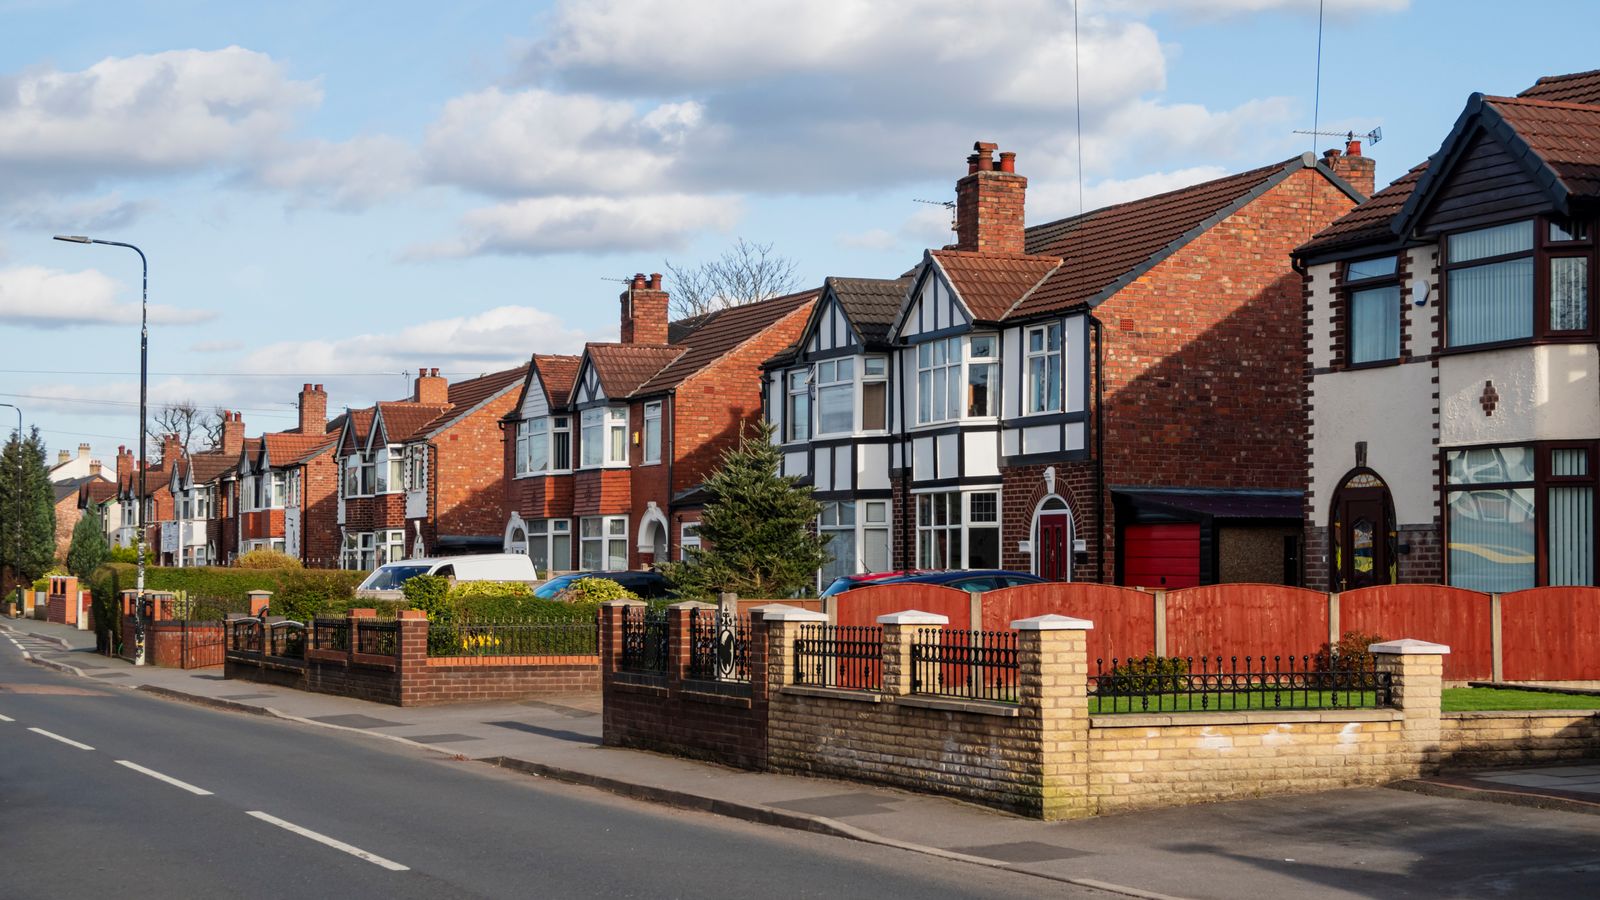 House prices: Growth slows with higher mortgage rates especially impacting more expensive areas